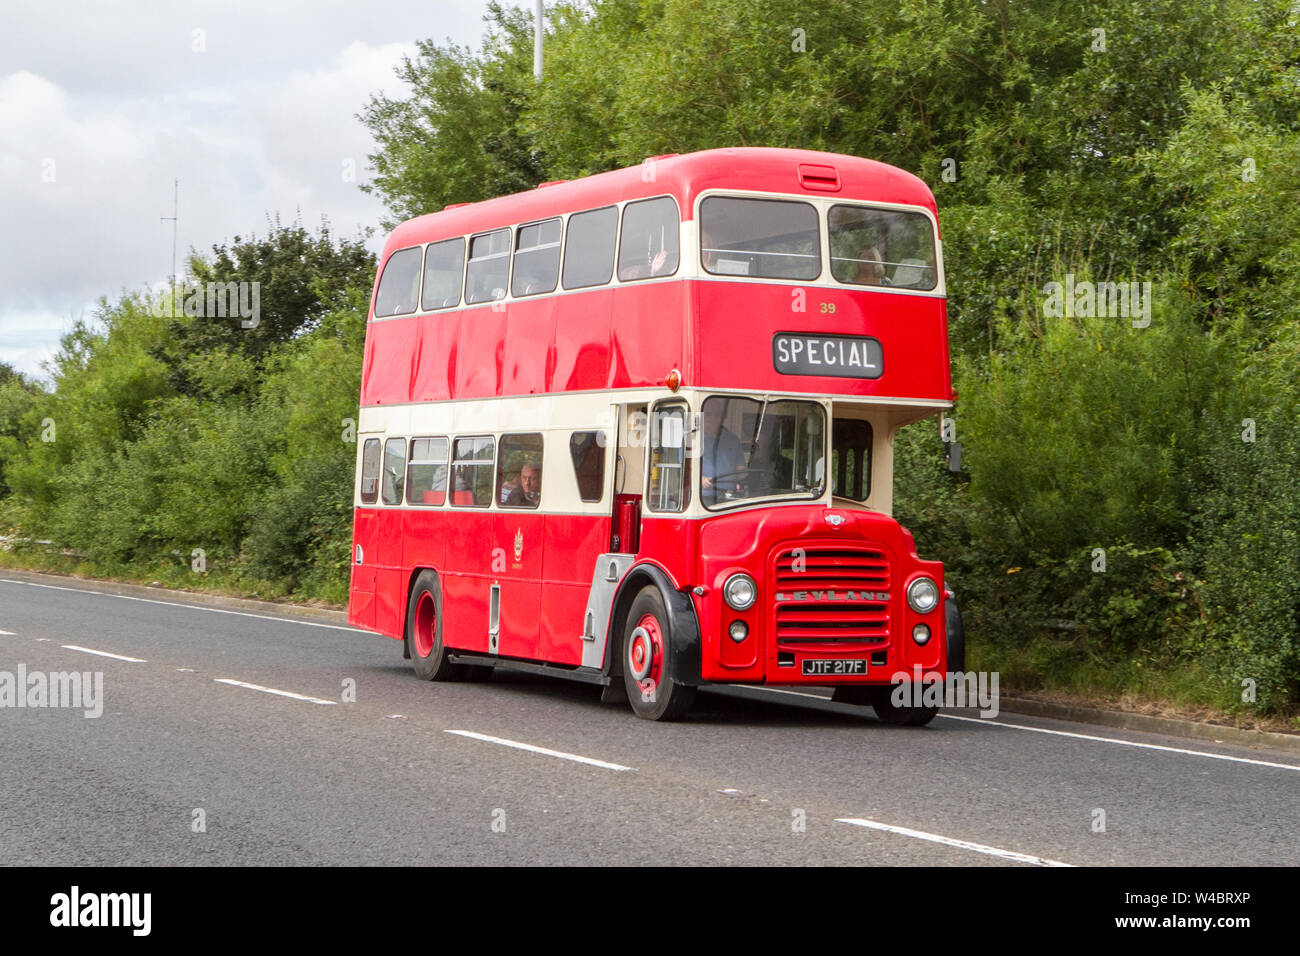 Fleetwood Festival of Transport – Tram Sunday 2019 JTF 217F Leyland bus vintage vehicles and cars attend the classic car show in Lancashire, UK Stock Photo